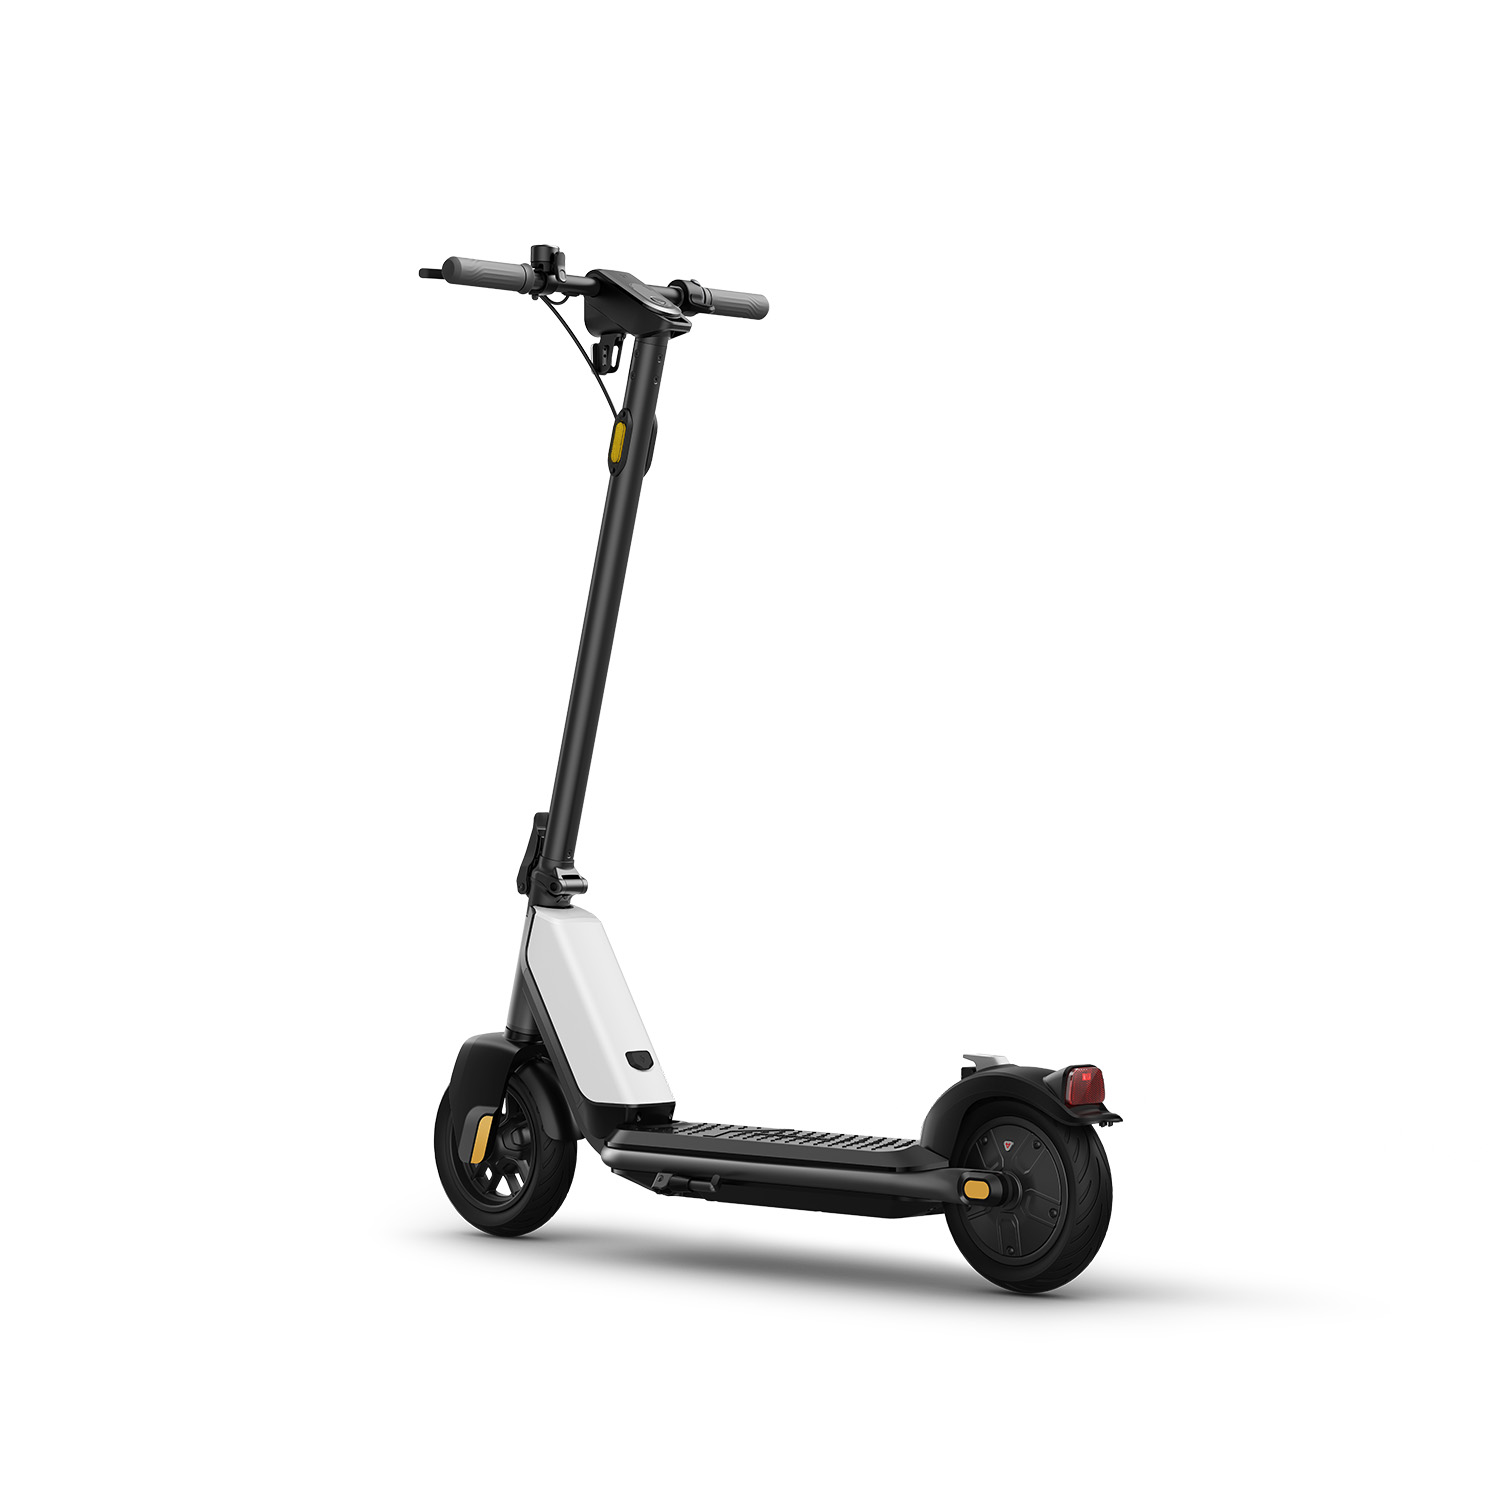 NIU KQi1 Pro Electric kick scooter Foldable Fast 15MPH / 15.5mi distance Charging Battery Commuting - White - image 2 of 7